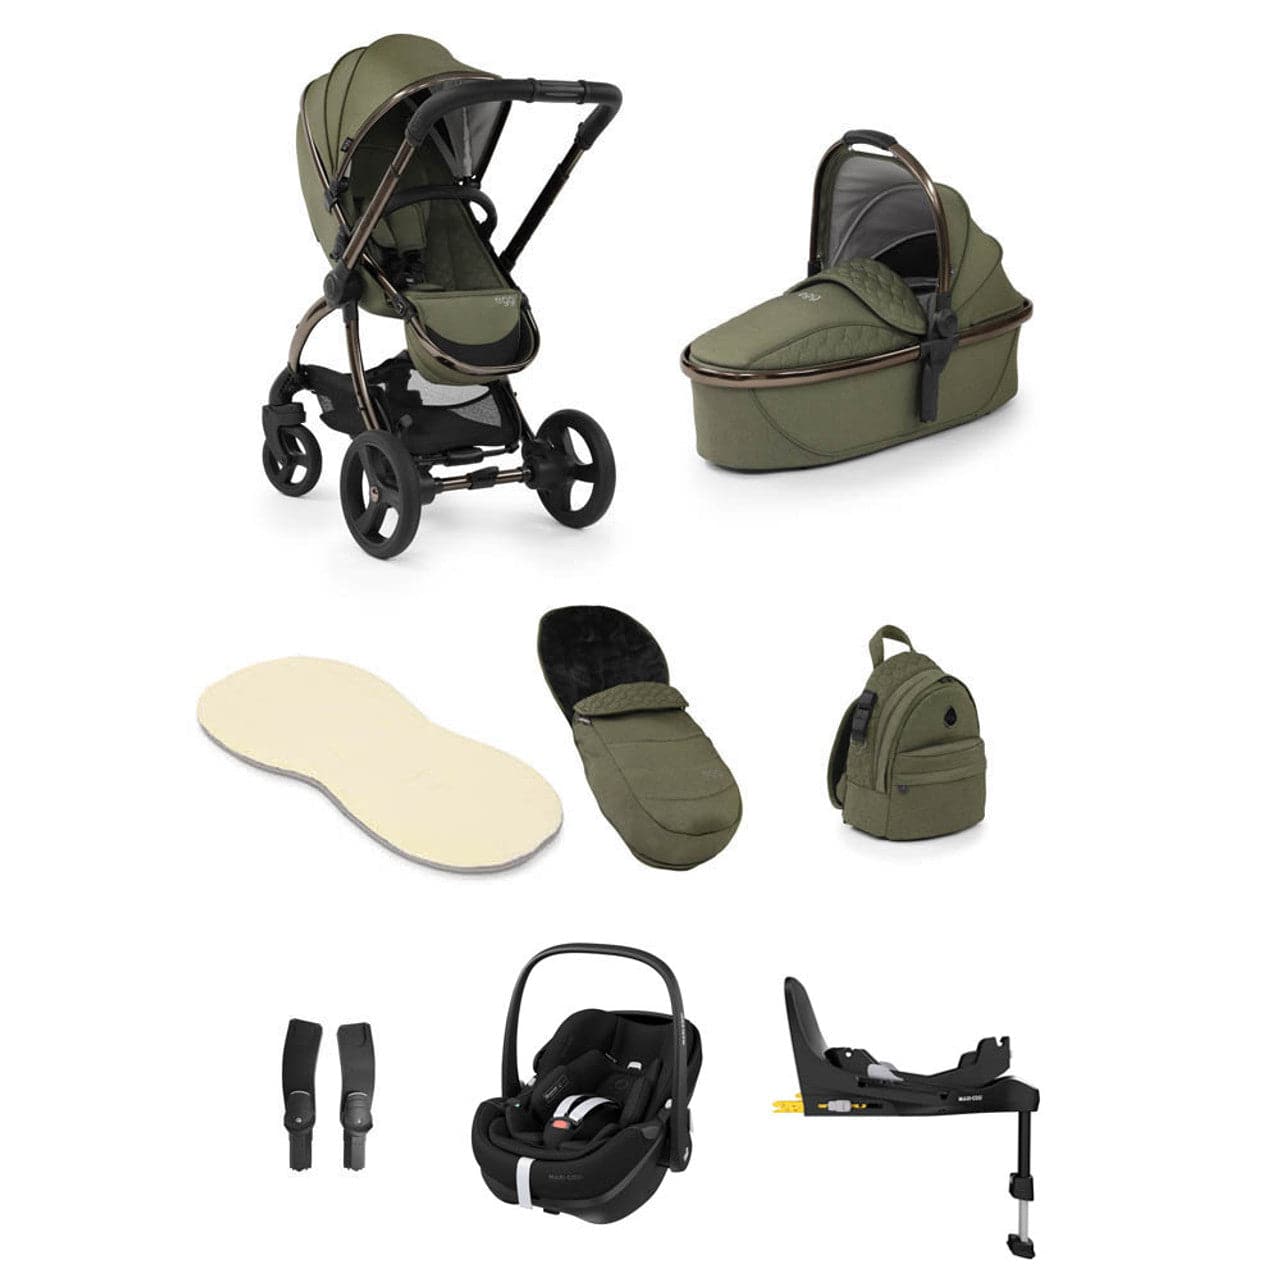 Egg® 2 Luxury Pebble 360 Pro i-Size Travel System Bundle - Hunter Green - For Your Little One